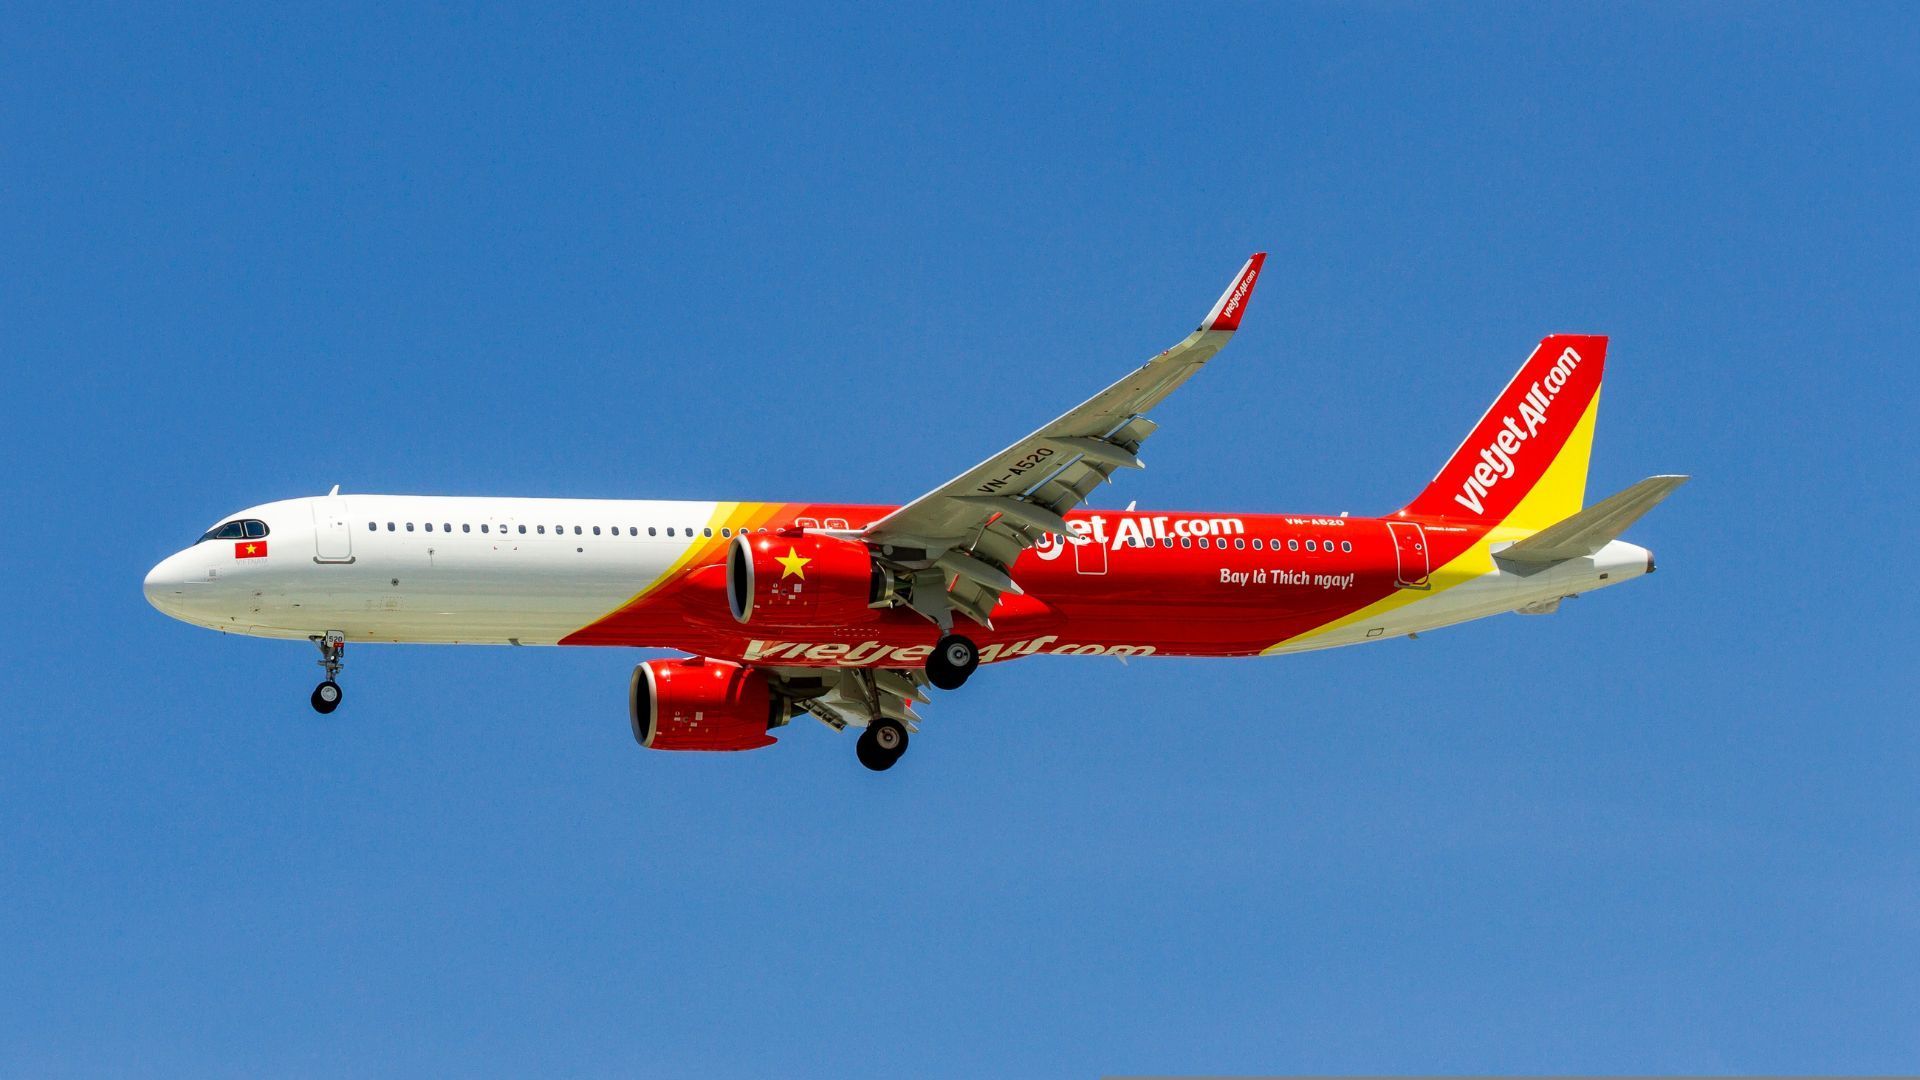 vietjet-announces-new-direct-flights-to-tokyo,-tickets-available-for-as-low-as-us$-0.35!